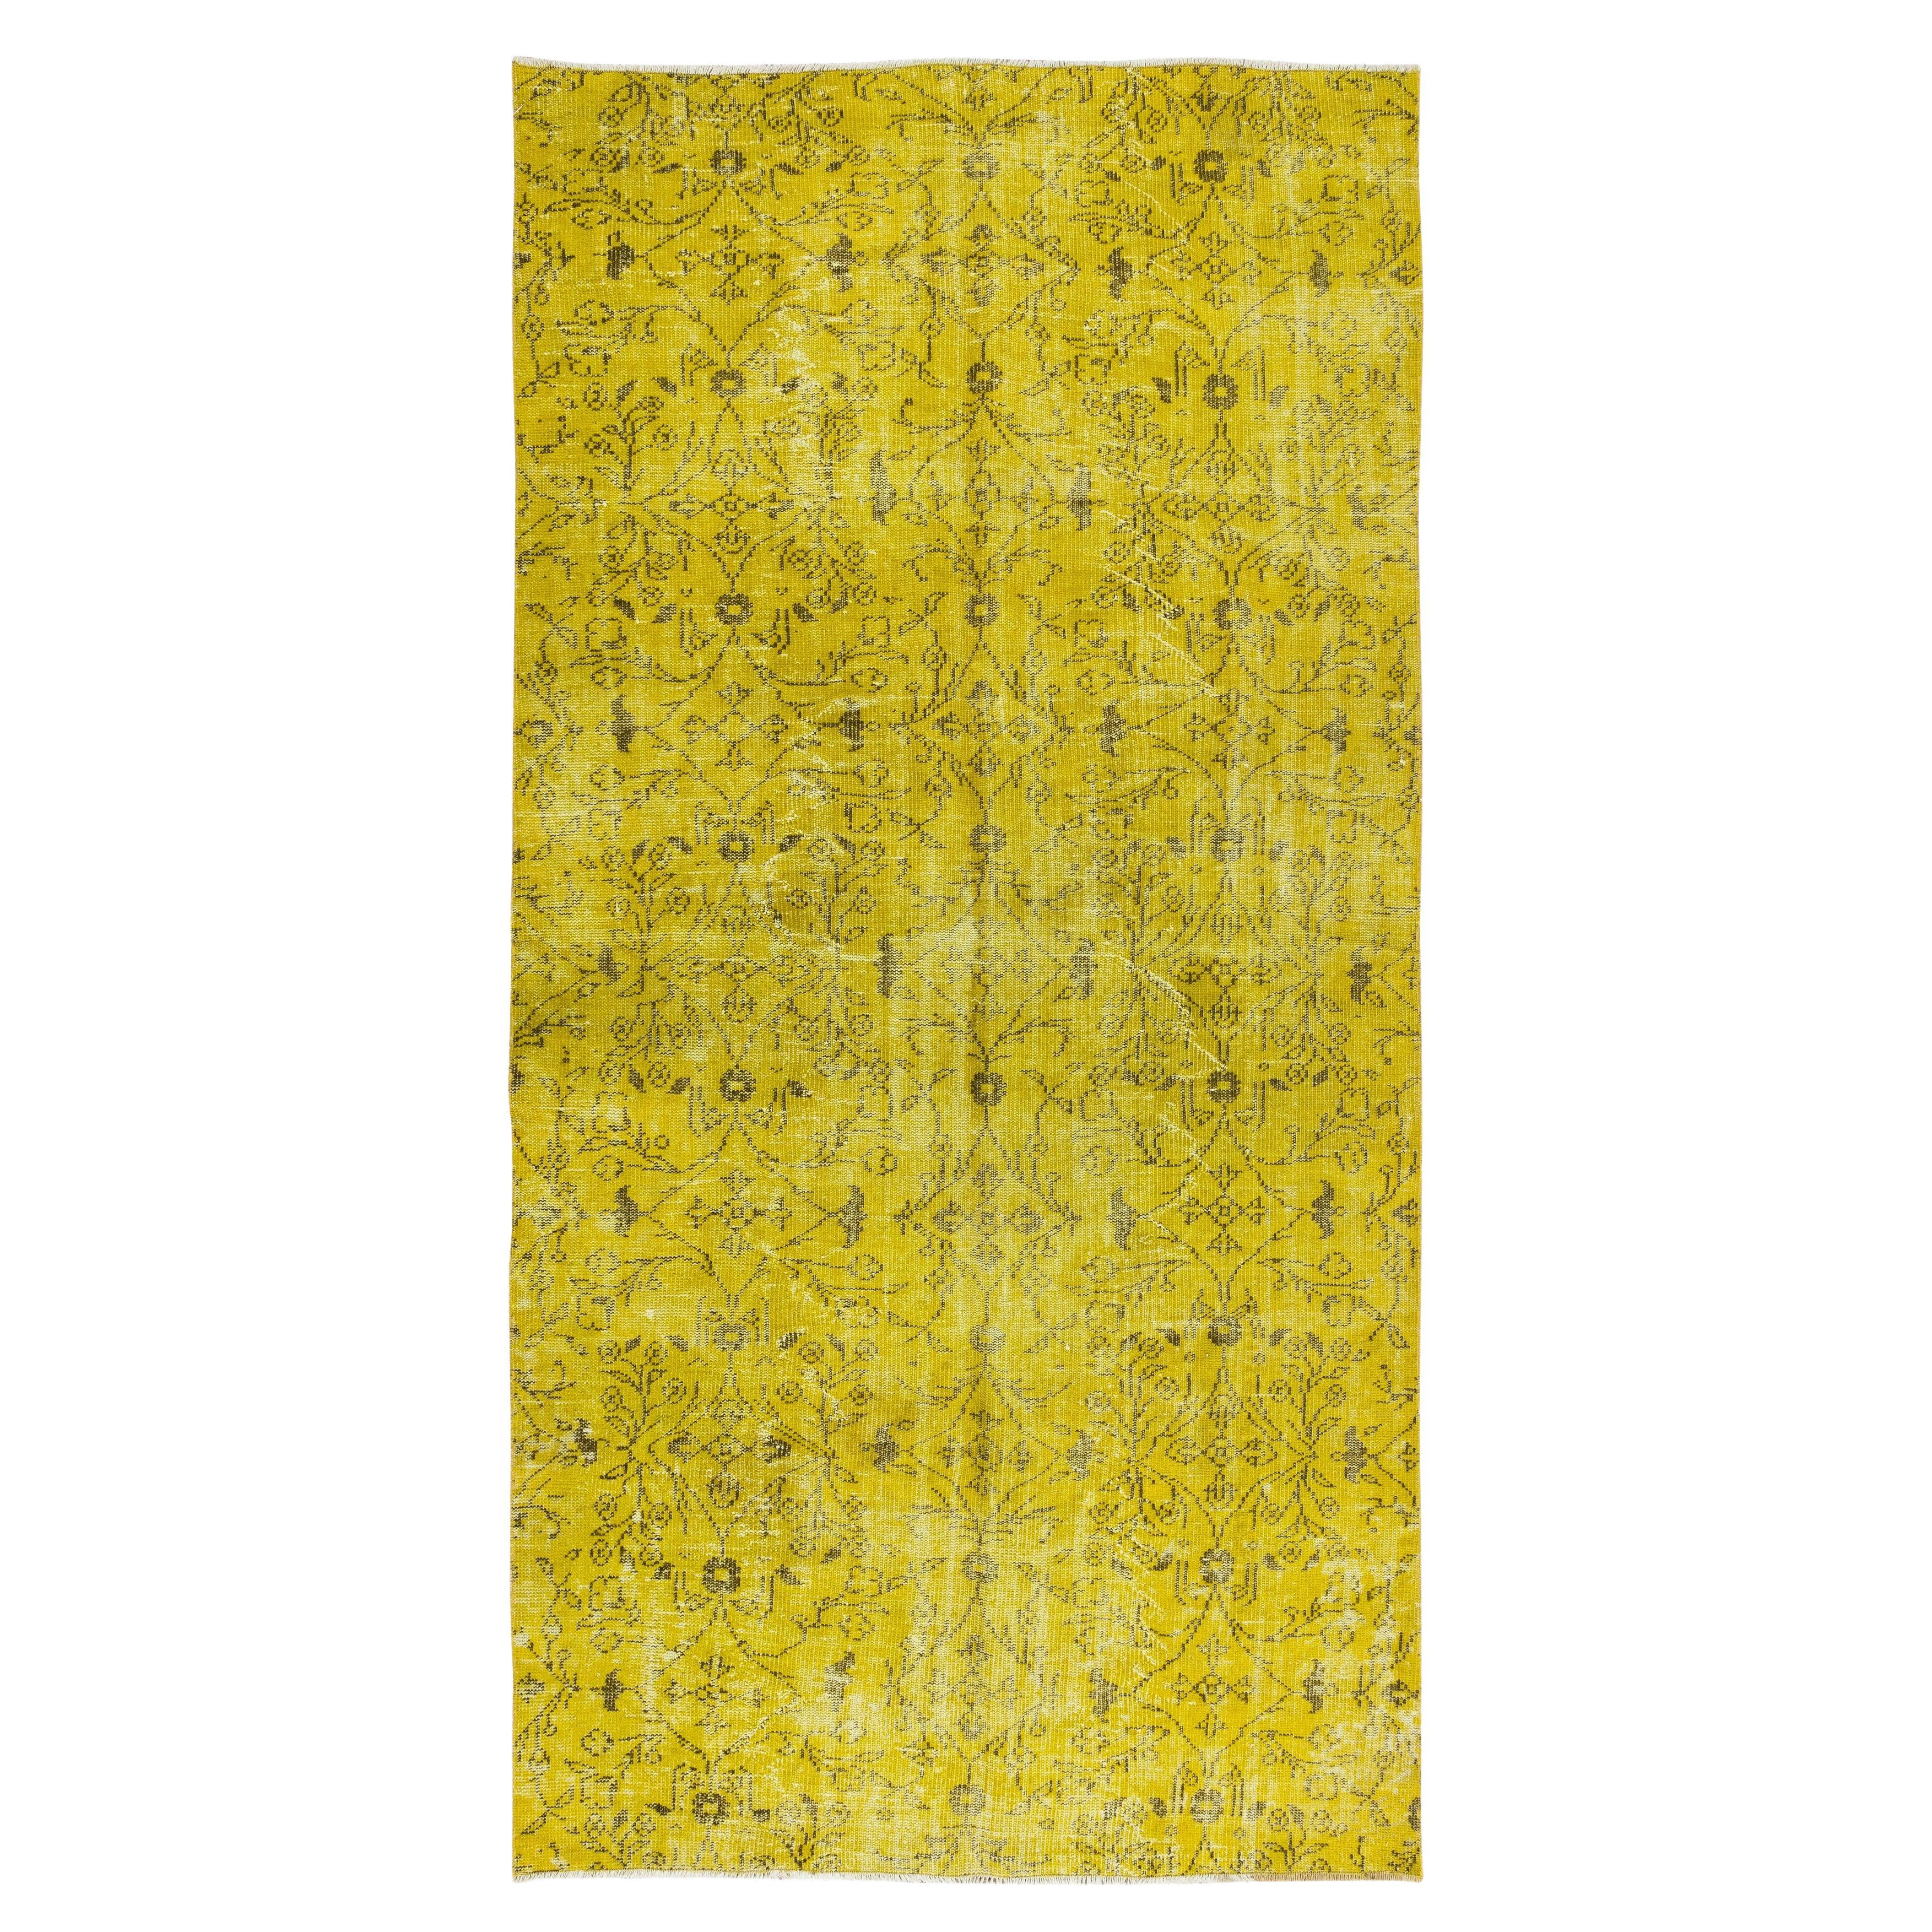 4.9x9.4 Ft Turkish Wool Rug Over-Dyed in Yellow for Modern Home & Office Decor For Sale